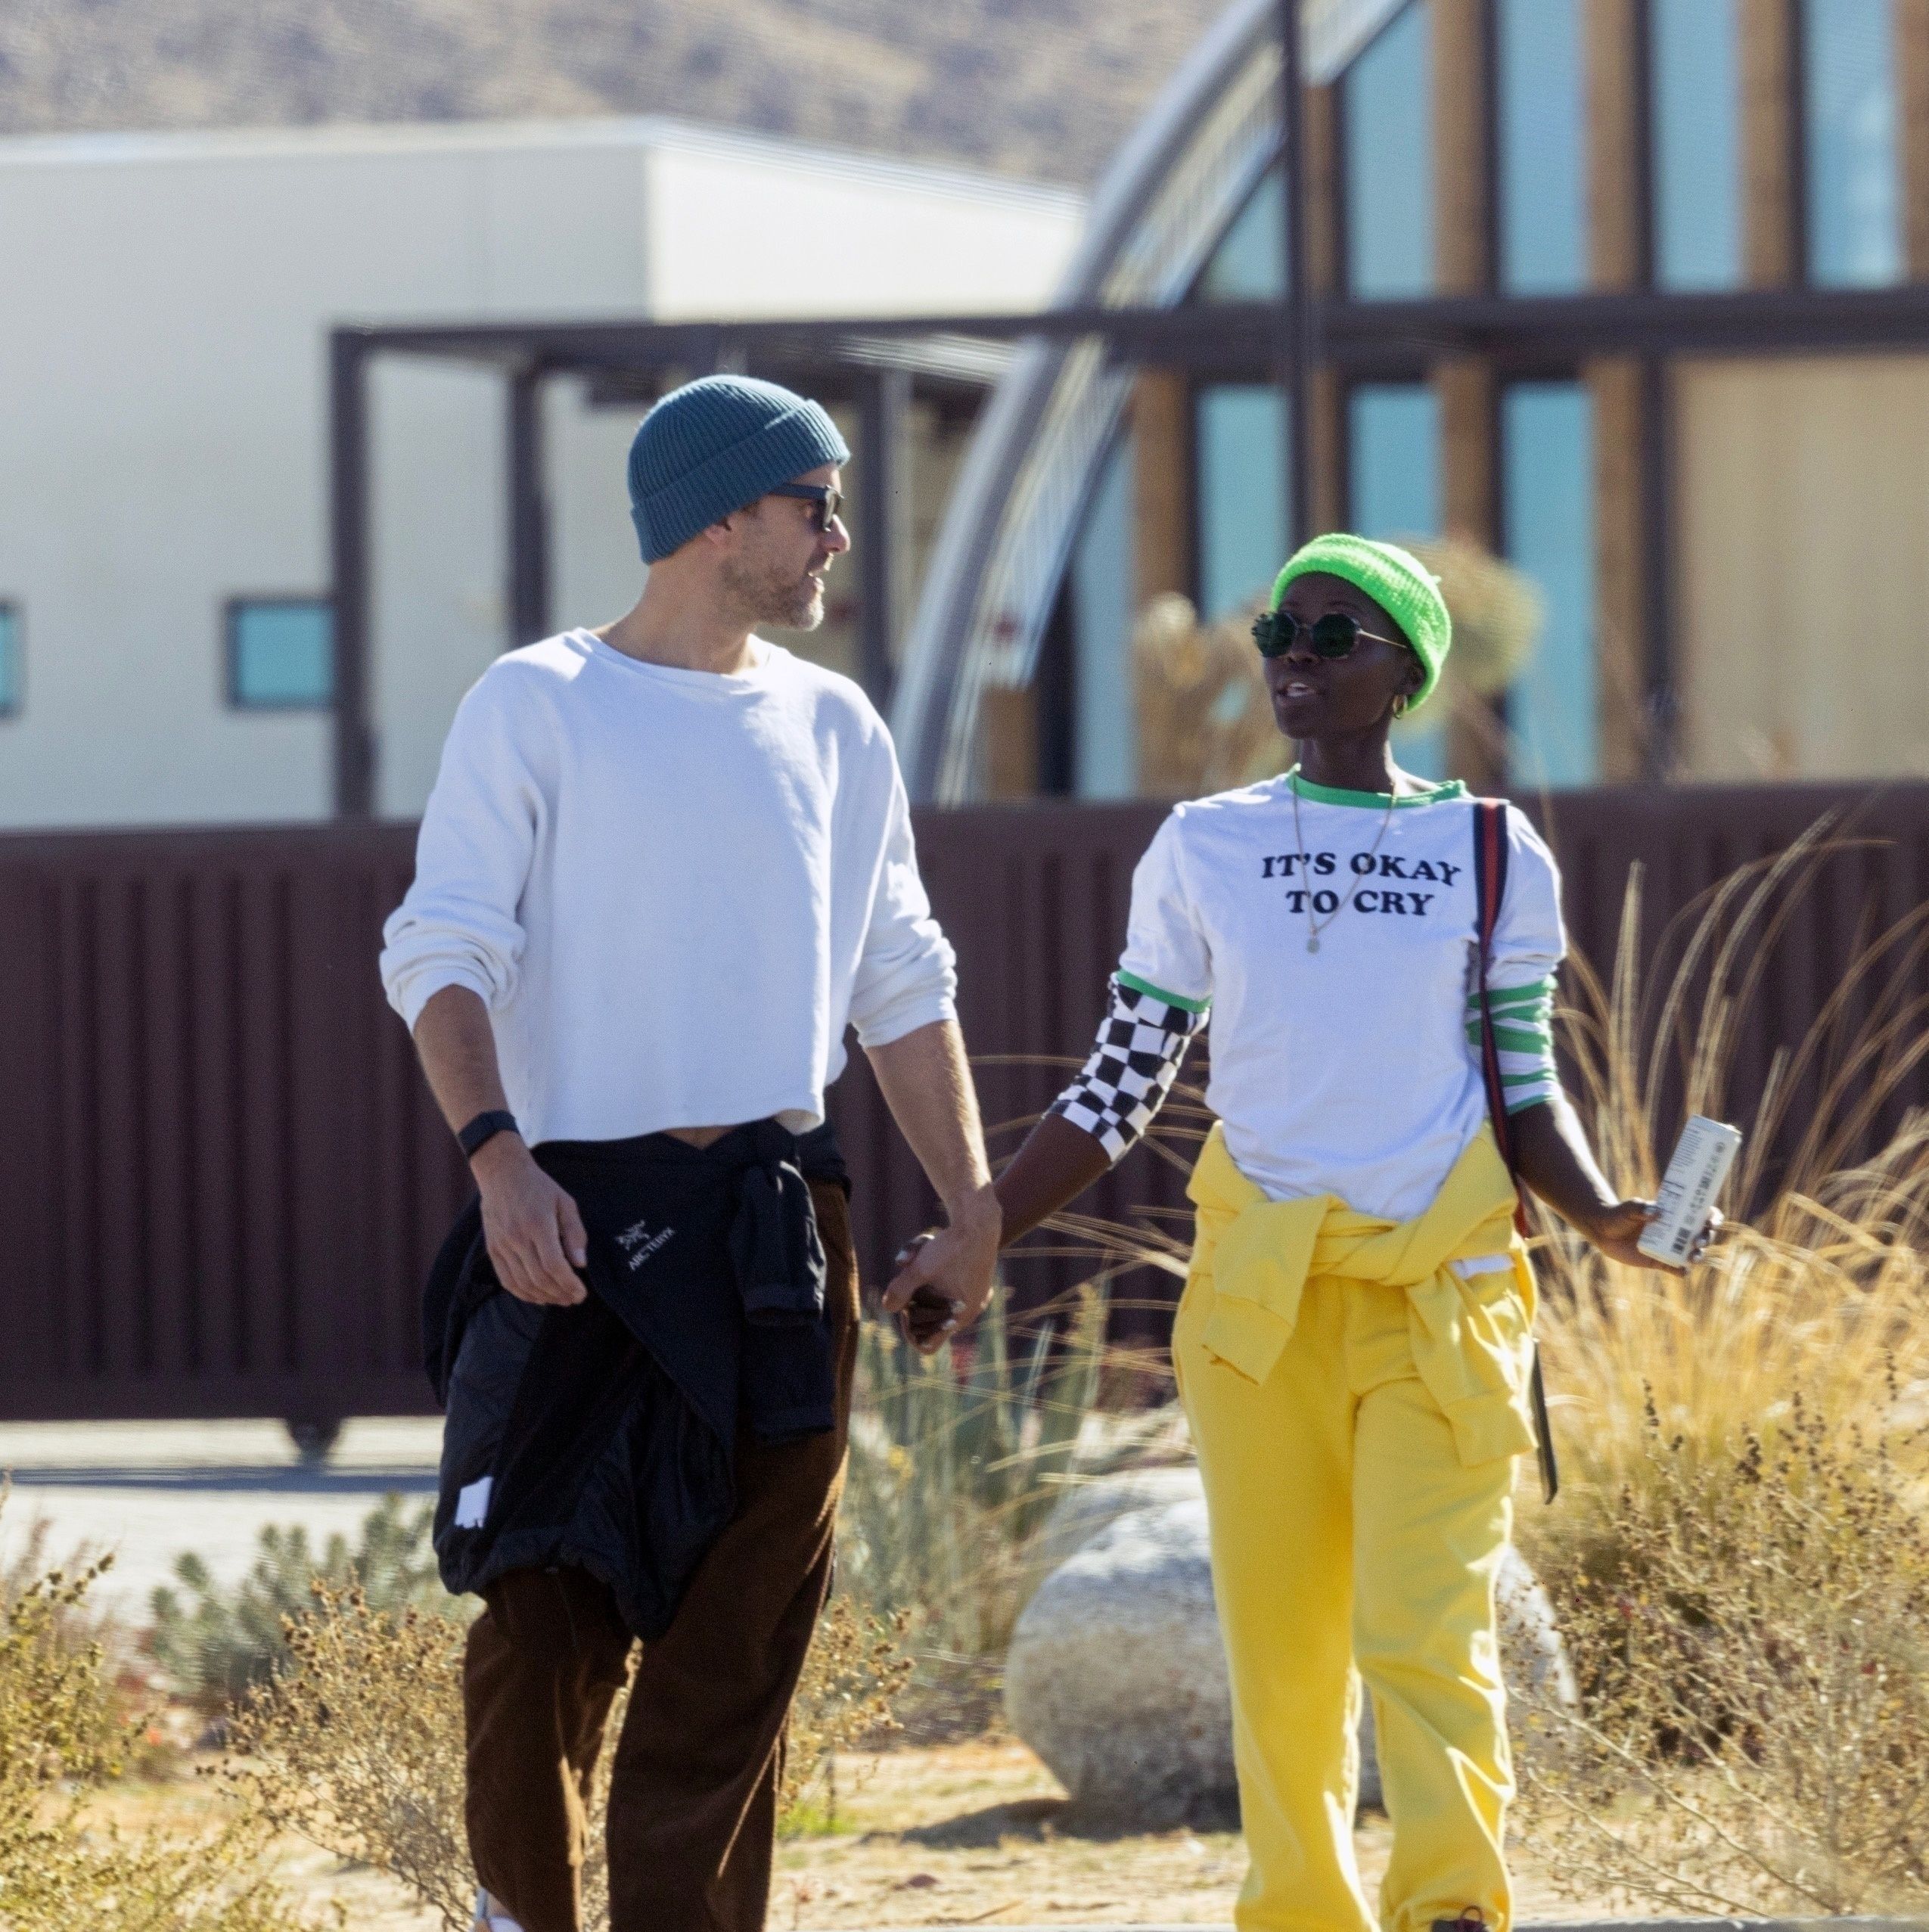 Joshua Jackson and Lupita Nyong’o Confirm They’re Dating With PDA-Filled Outing